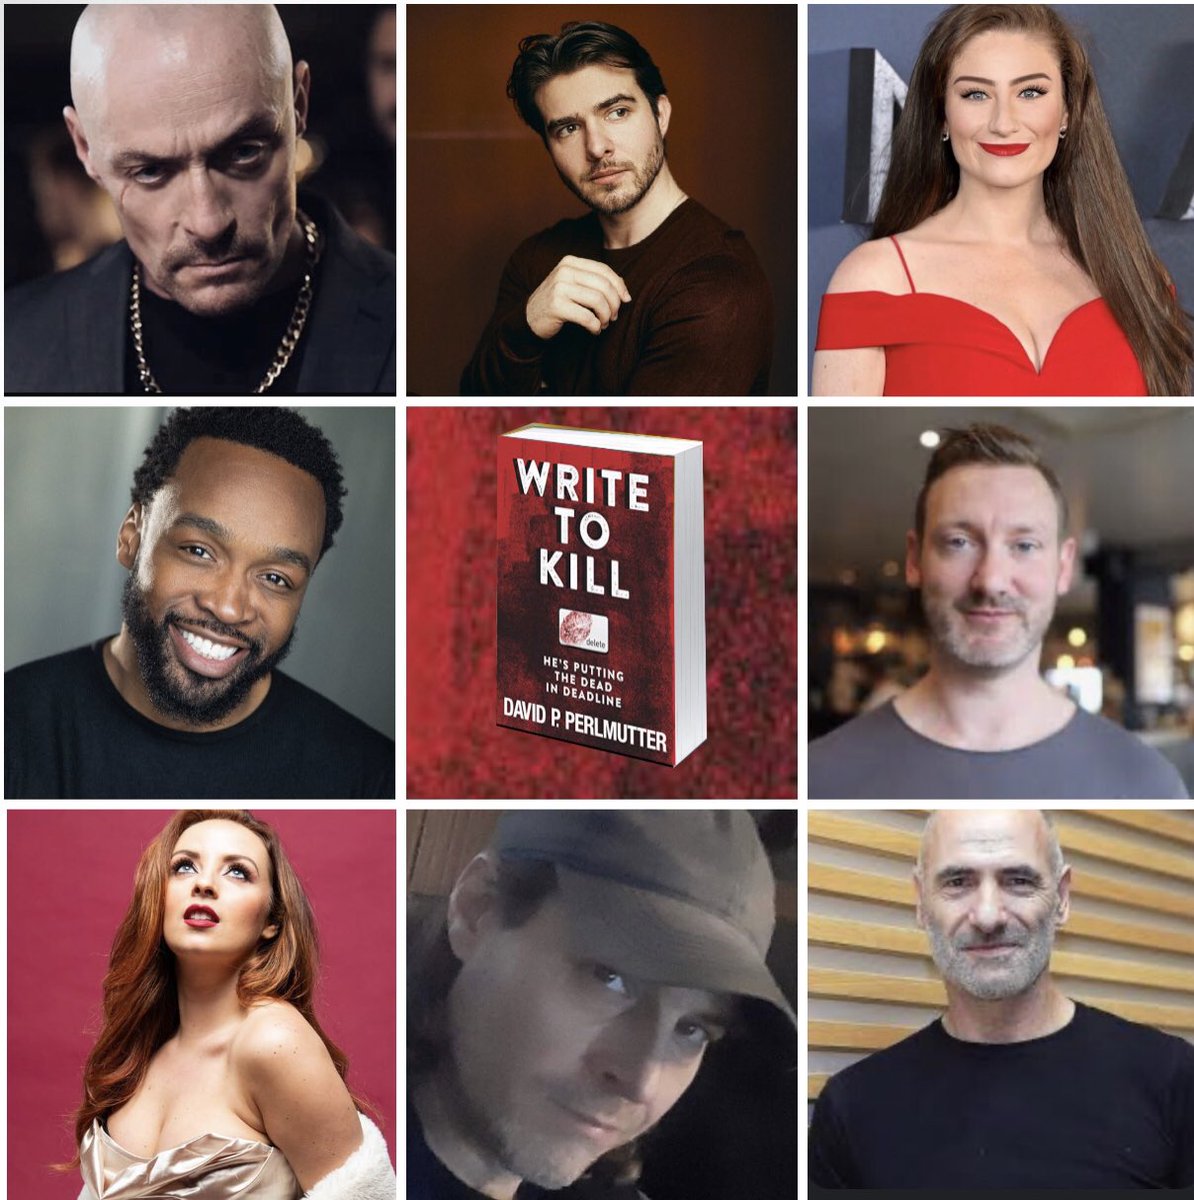 @stephanietara ⭐️ ⭐️ WE ARE DETERMINED TO GIVE READERS WHAT THEY WANT - A TV SERIES OF WRITE TO KILL ⭐️⭐️

The @Kickstarter funding campaign for filming of the #TVPilot for #WriteToKill is LIVE, starring an INTERNATIONAL CAST - If you want to be involved as a producer, actor, or wish to back…